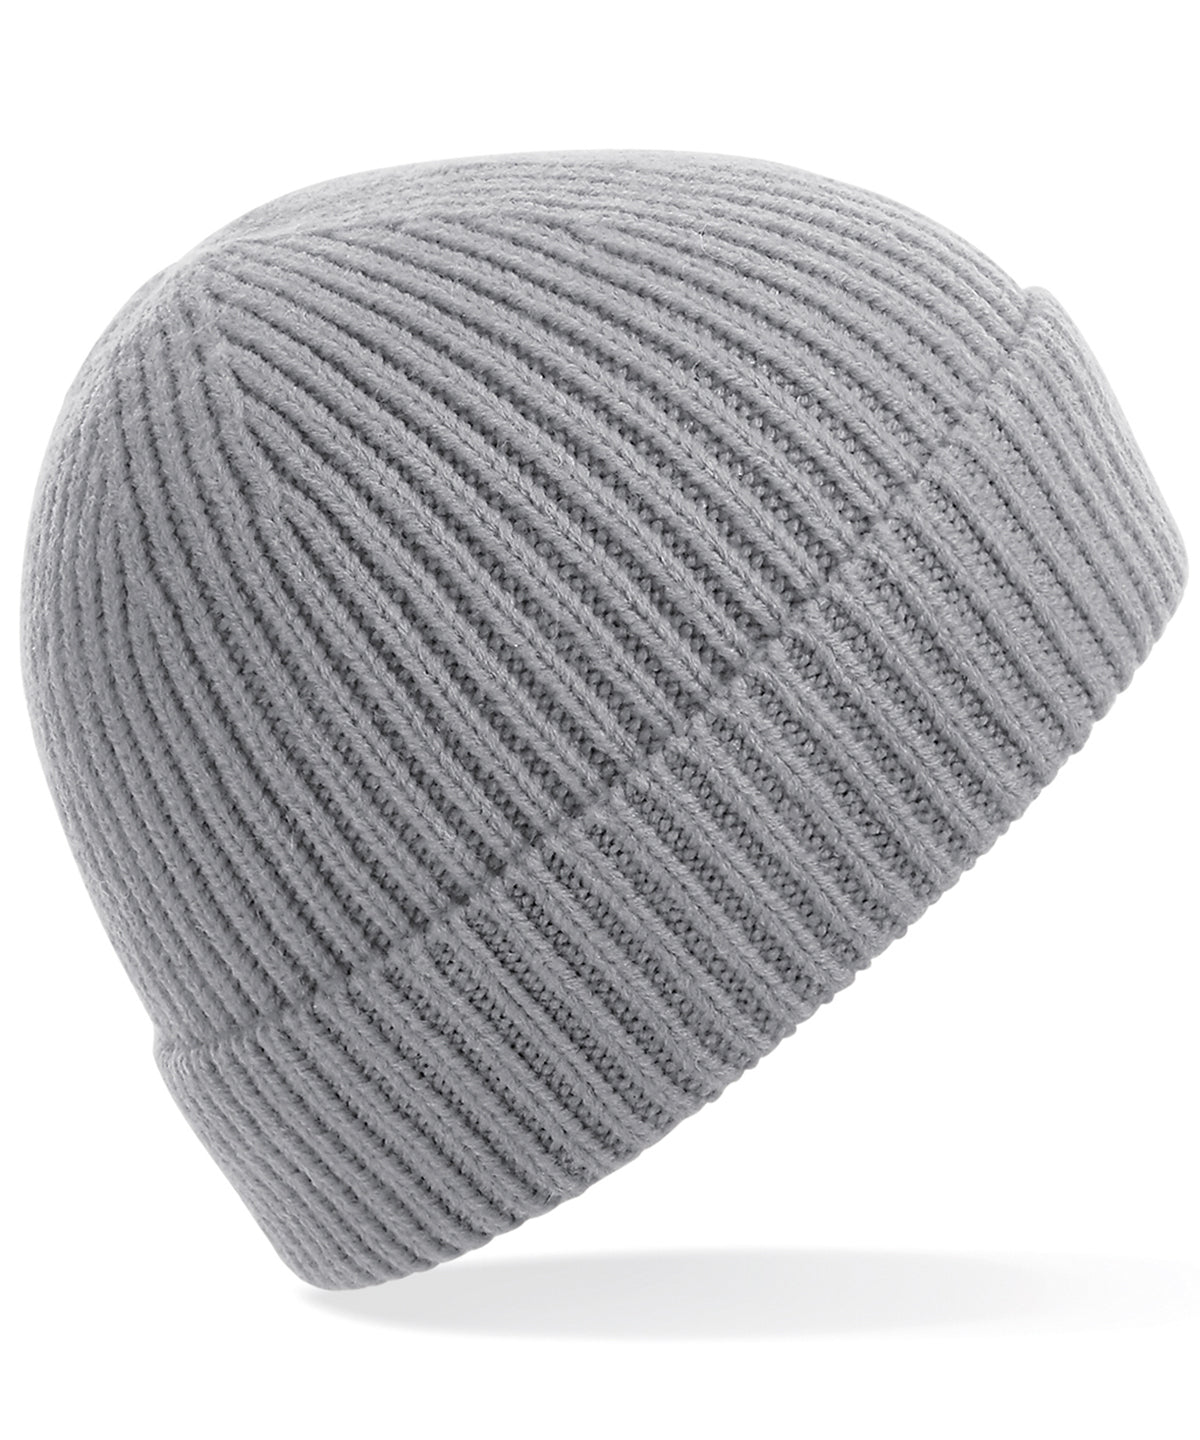 Personalised Hats - Light Grey Beechfield Engineered knit ribbed beanie